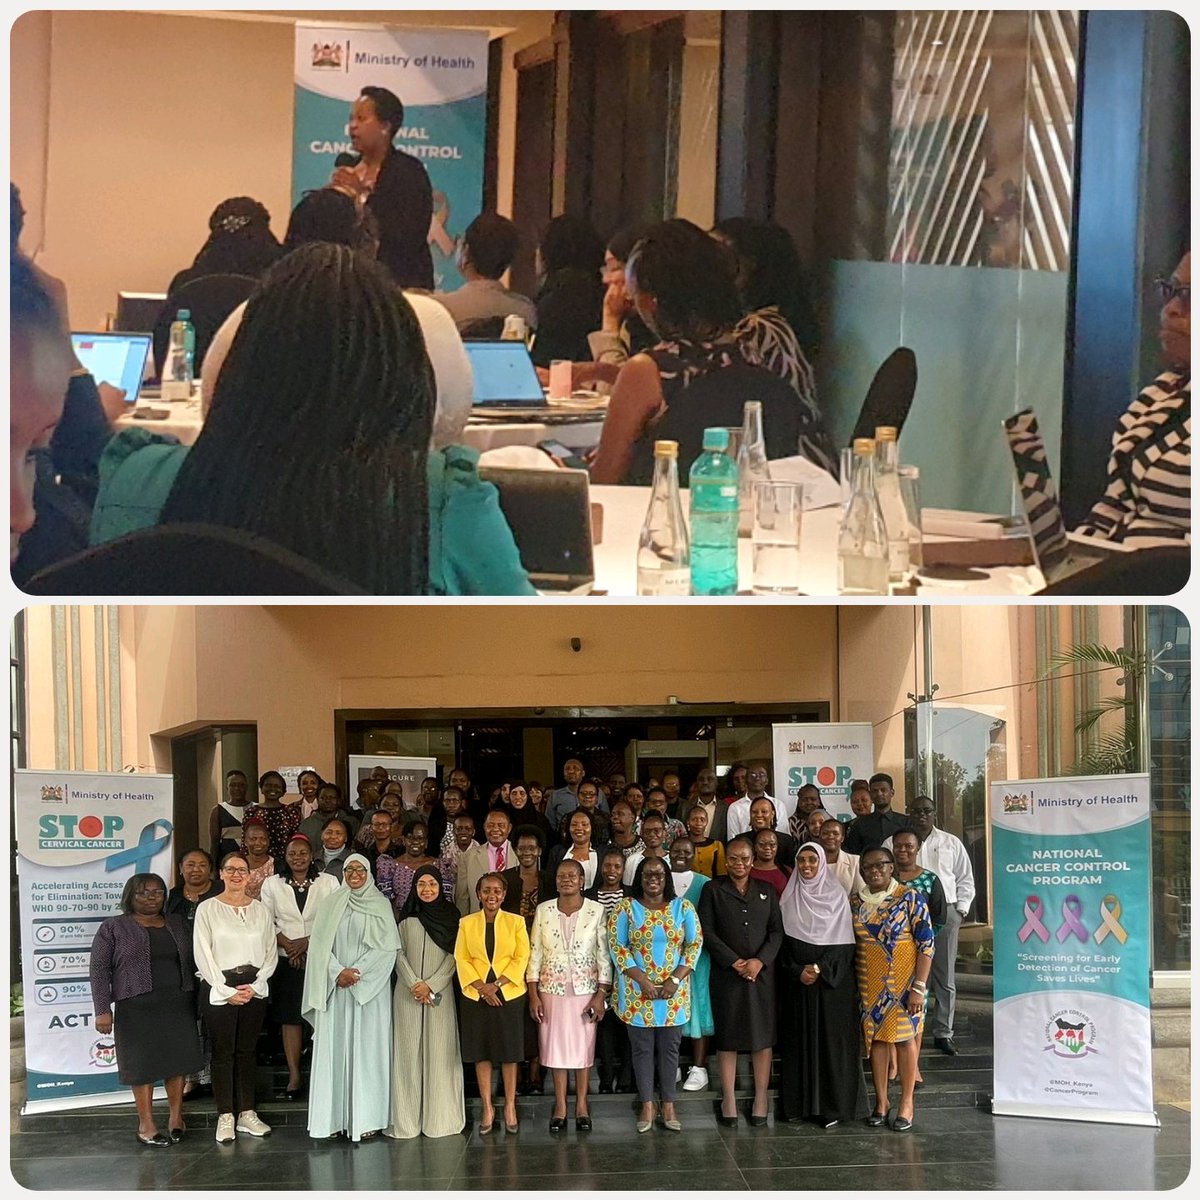 #CervicalCancerAdvocacy #CervicalScreening #CervicalCancerPreventionWeek @BendaKithaka of @KILELEHealthKE training participants on #advocacy Great attendance with champions, policy makes and a number of County  #FirstLadies @CancerProgram @CANCERKESHO @KILELEHealthKE @NCDAK